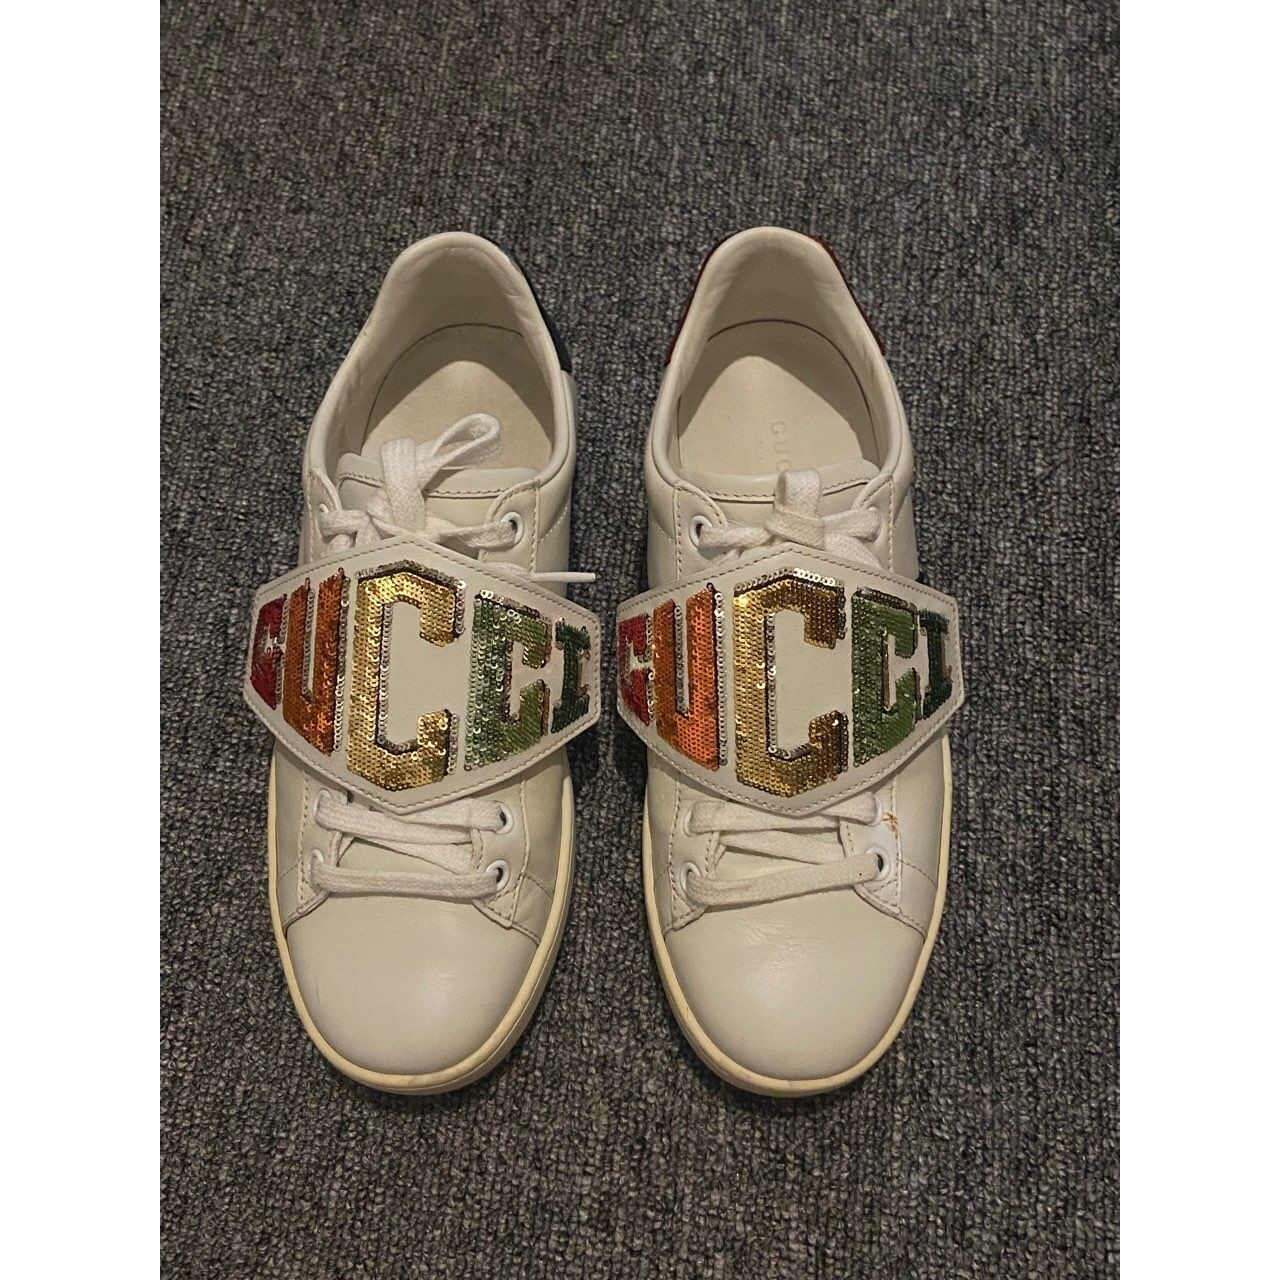 Gucci White Leather Sequin Embellished Ace Low Top Sneakers